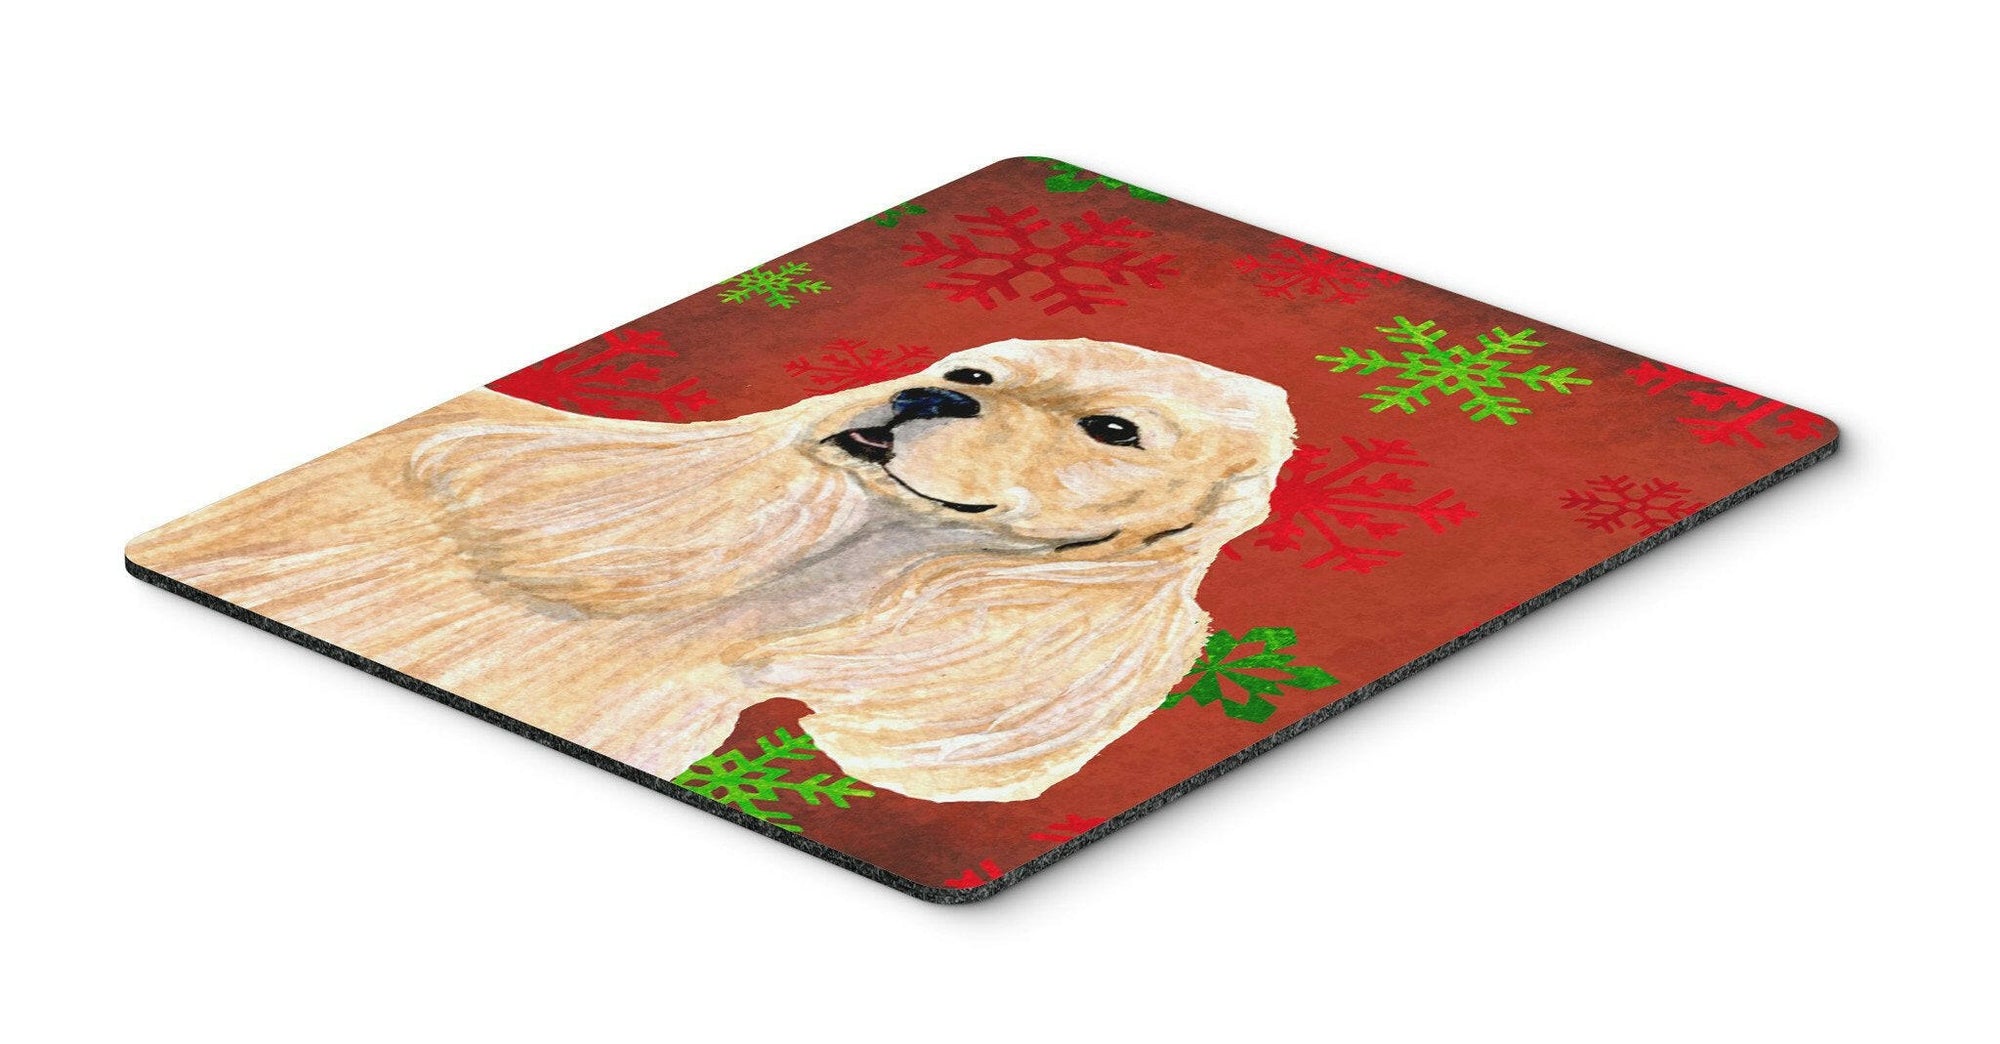 Cocker Spaniel Red and Green Snowflakes Christmas Mouse Pad, Hot Pad or Trivet by Caroline's Treasures